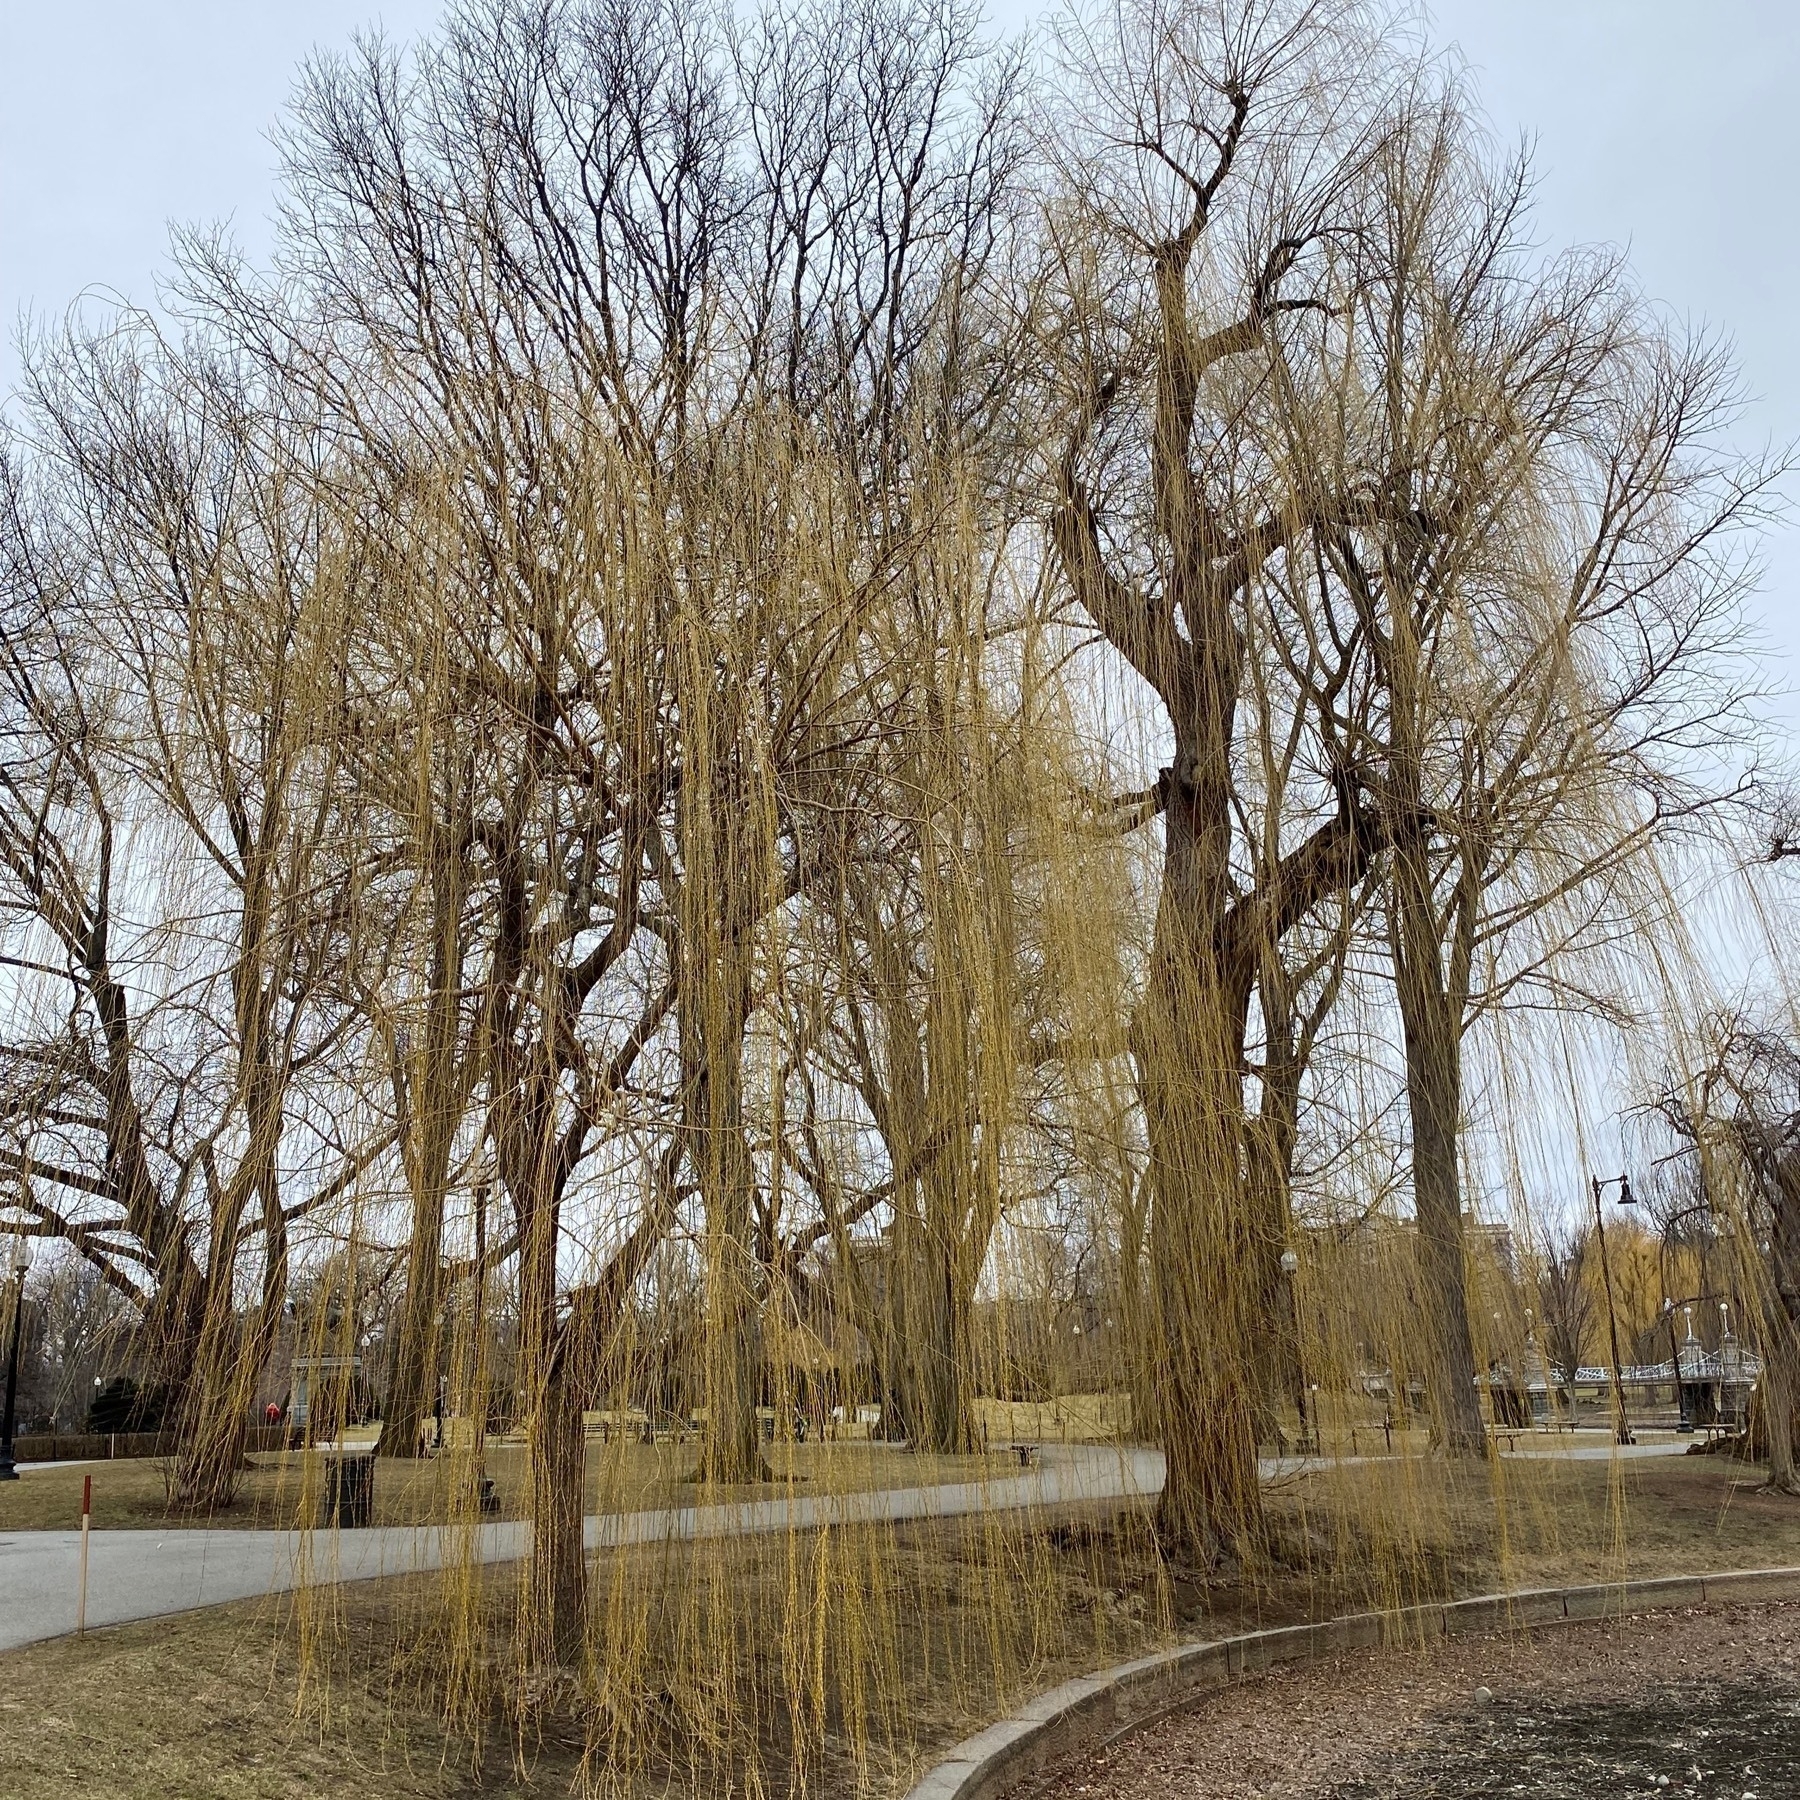 Willow trees with yellow sprouts in front of bare branched trees in a park.